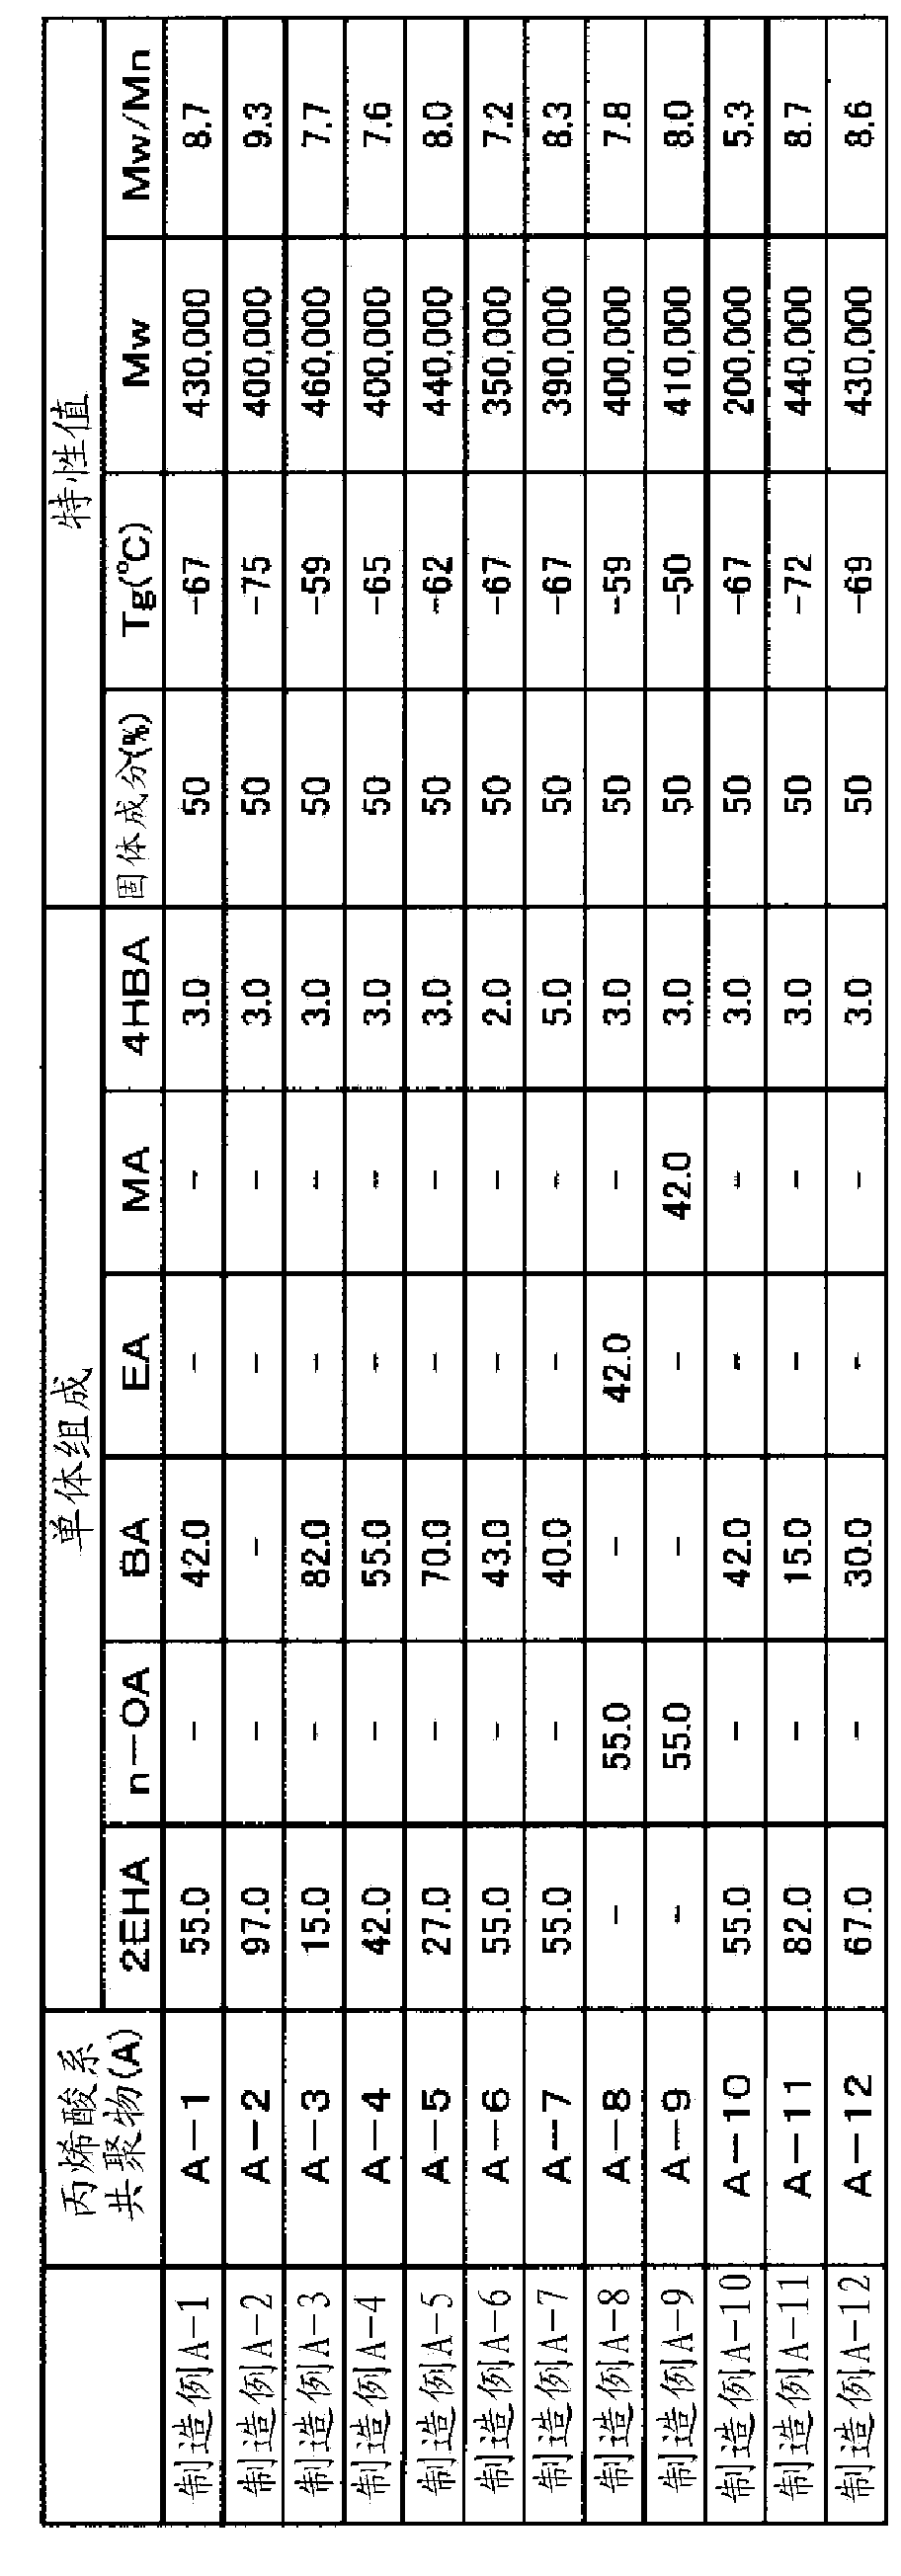 Adhesive composition and film for optical member